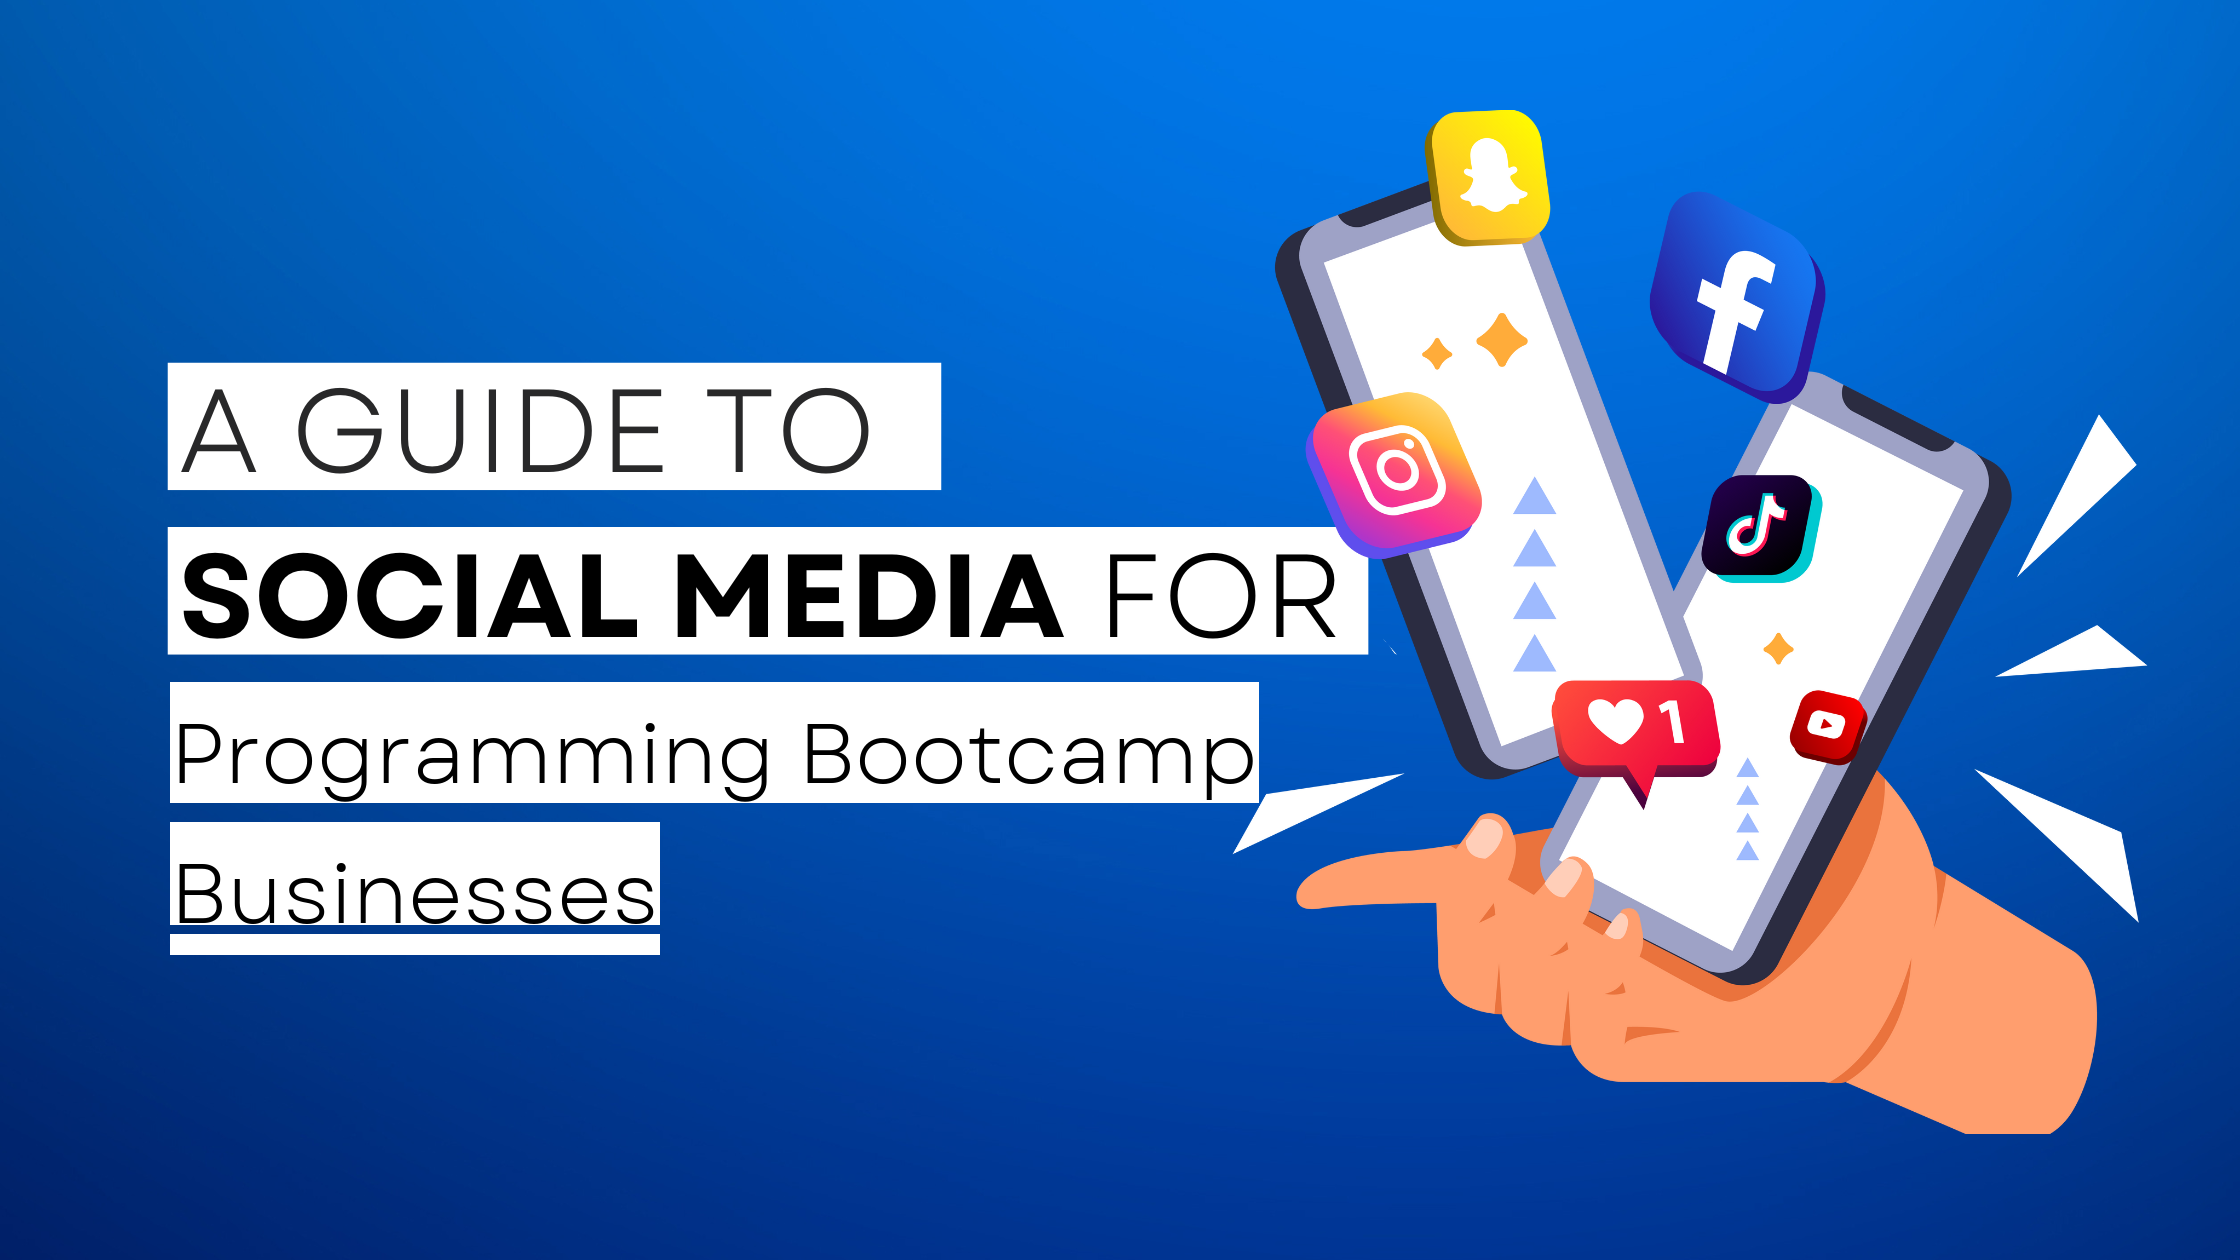 How to start Programming Bootcamp  on social media